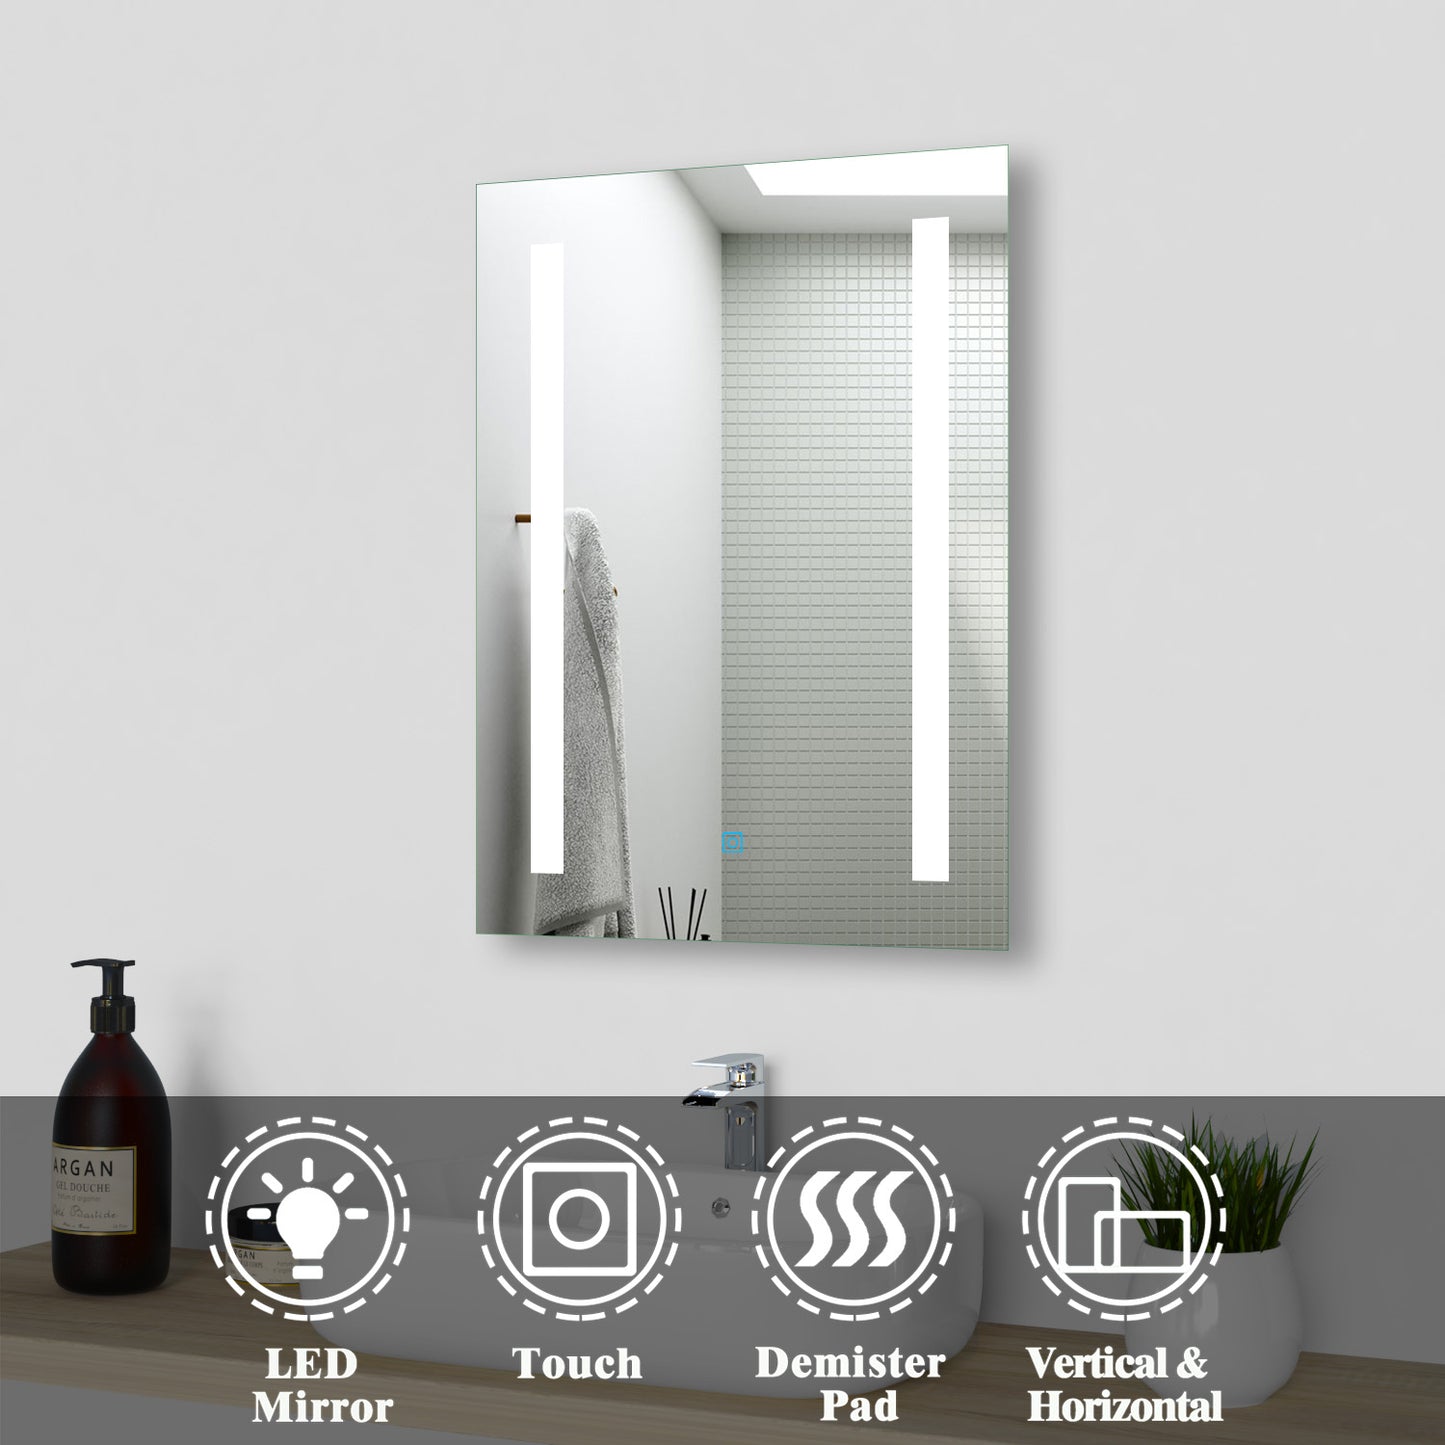 LED Illuminated Bathroom Mirrors with Demister Pad Wall Mounted